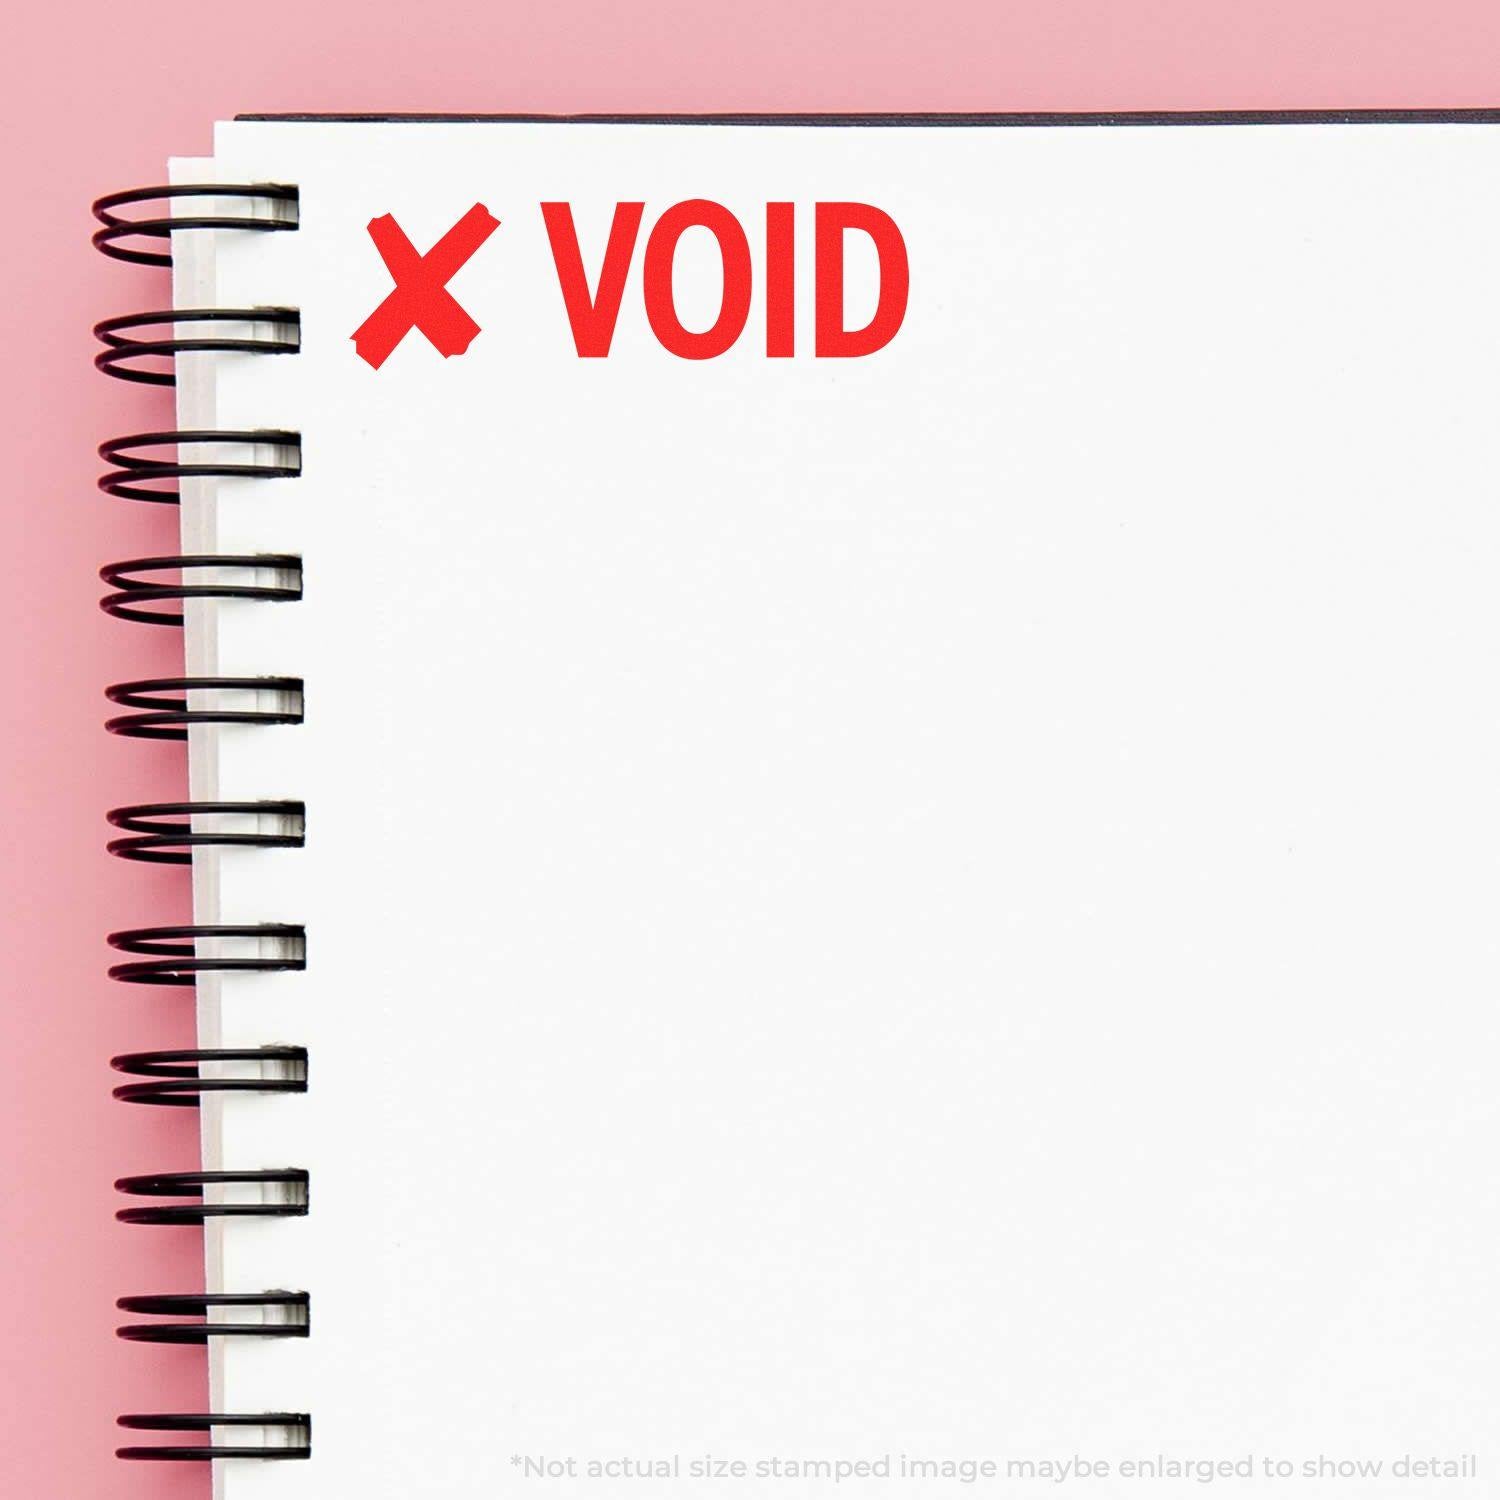 A stock office rubber stamp with a stamped image showing how the text "VOID" in a large font with a cross (X) sign on the left side is displayed after stamping.